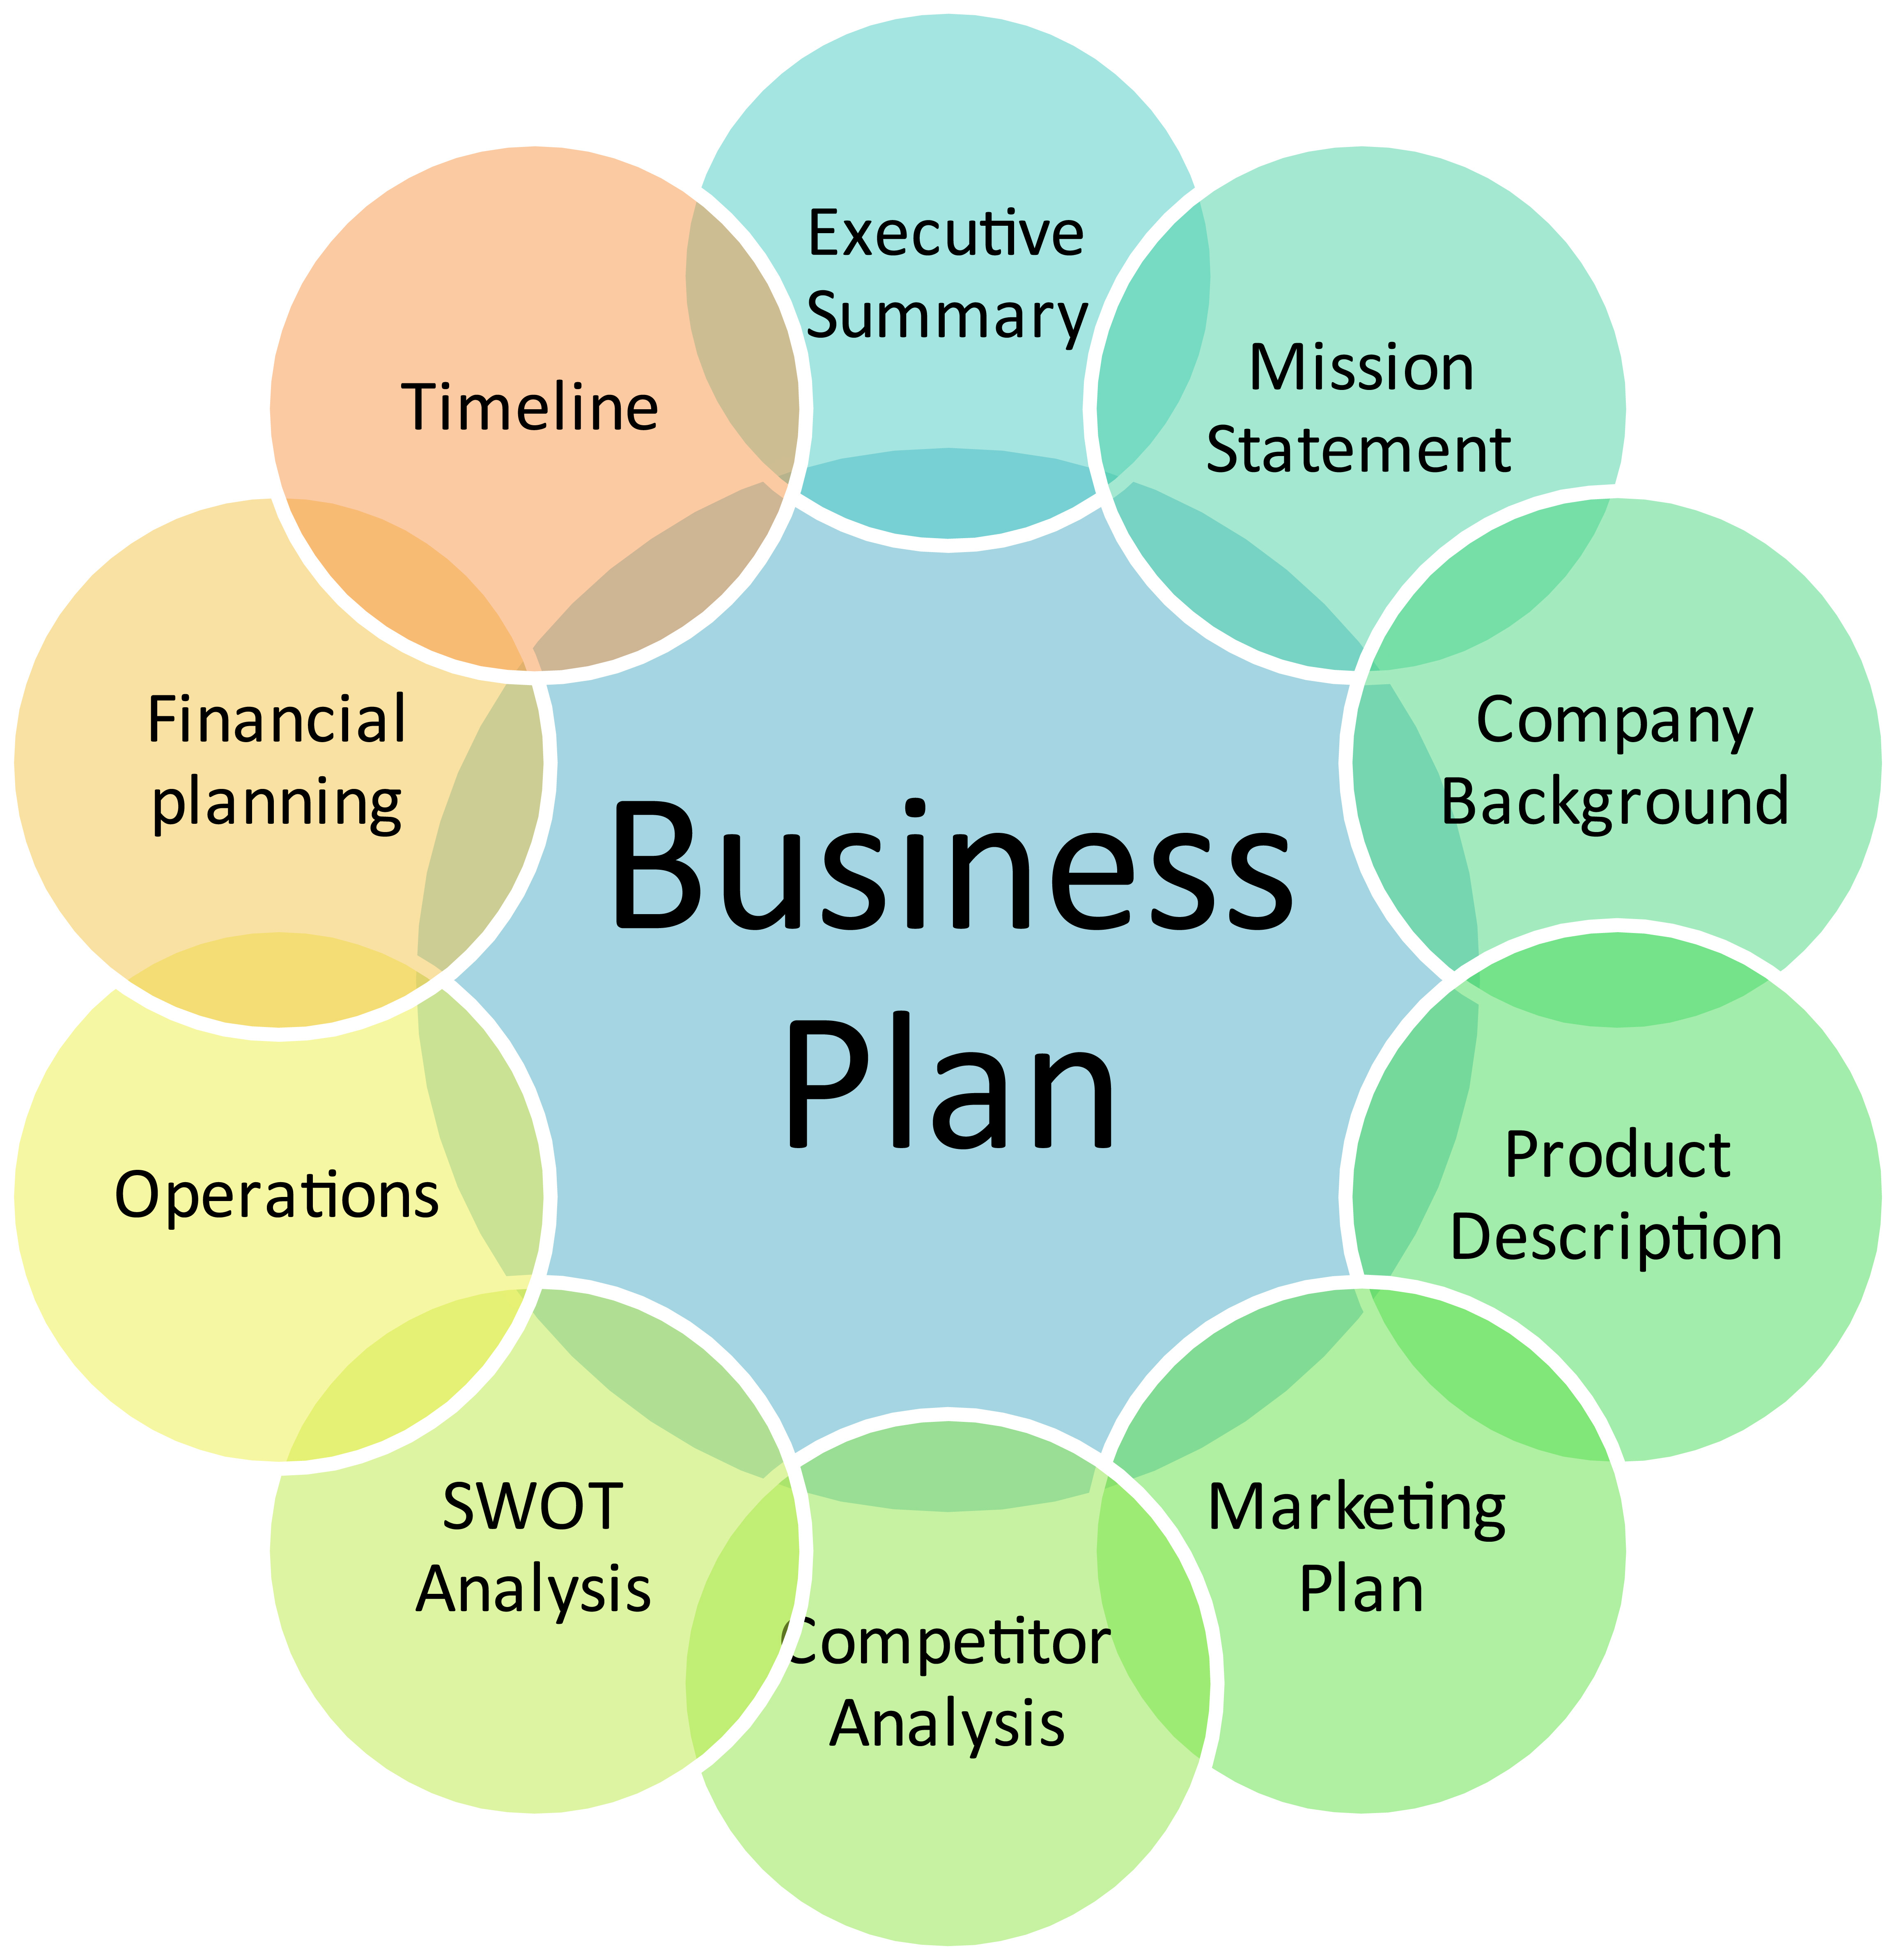 Business Plan Components